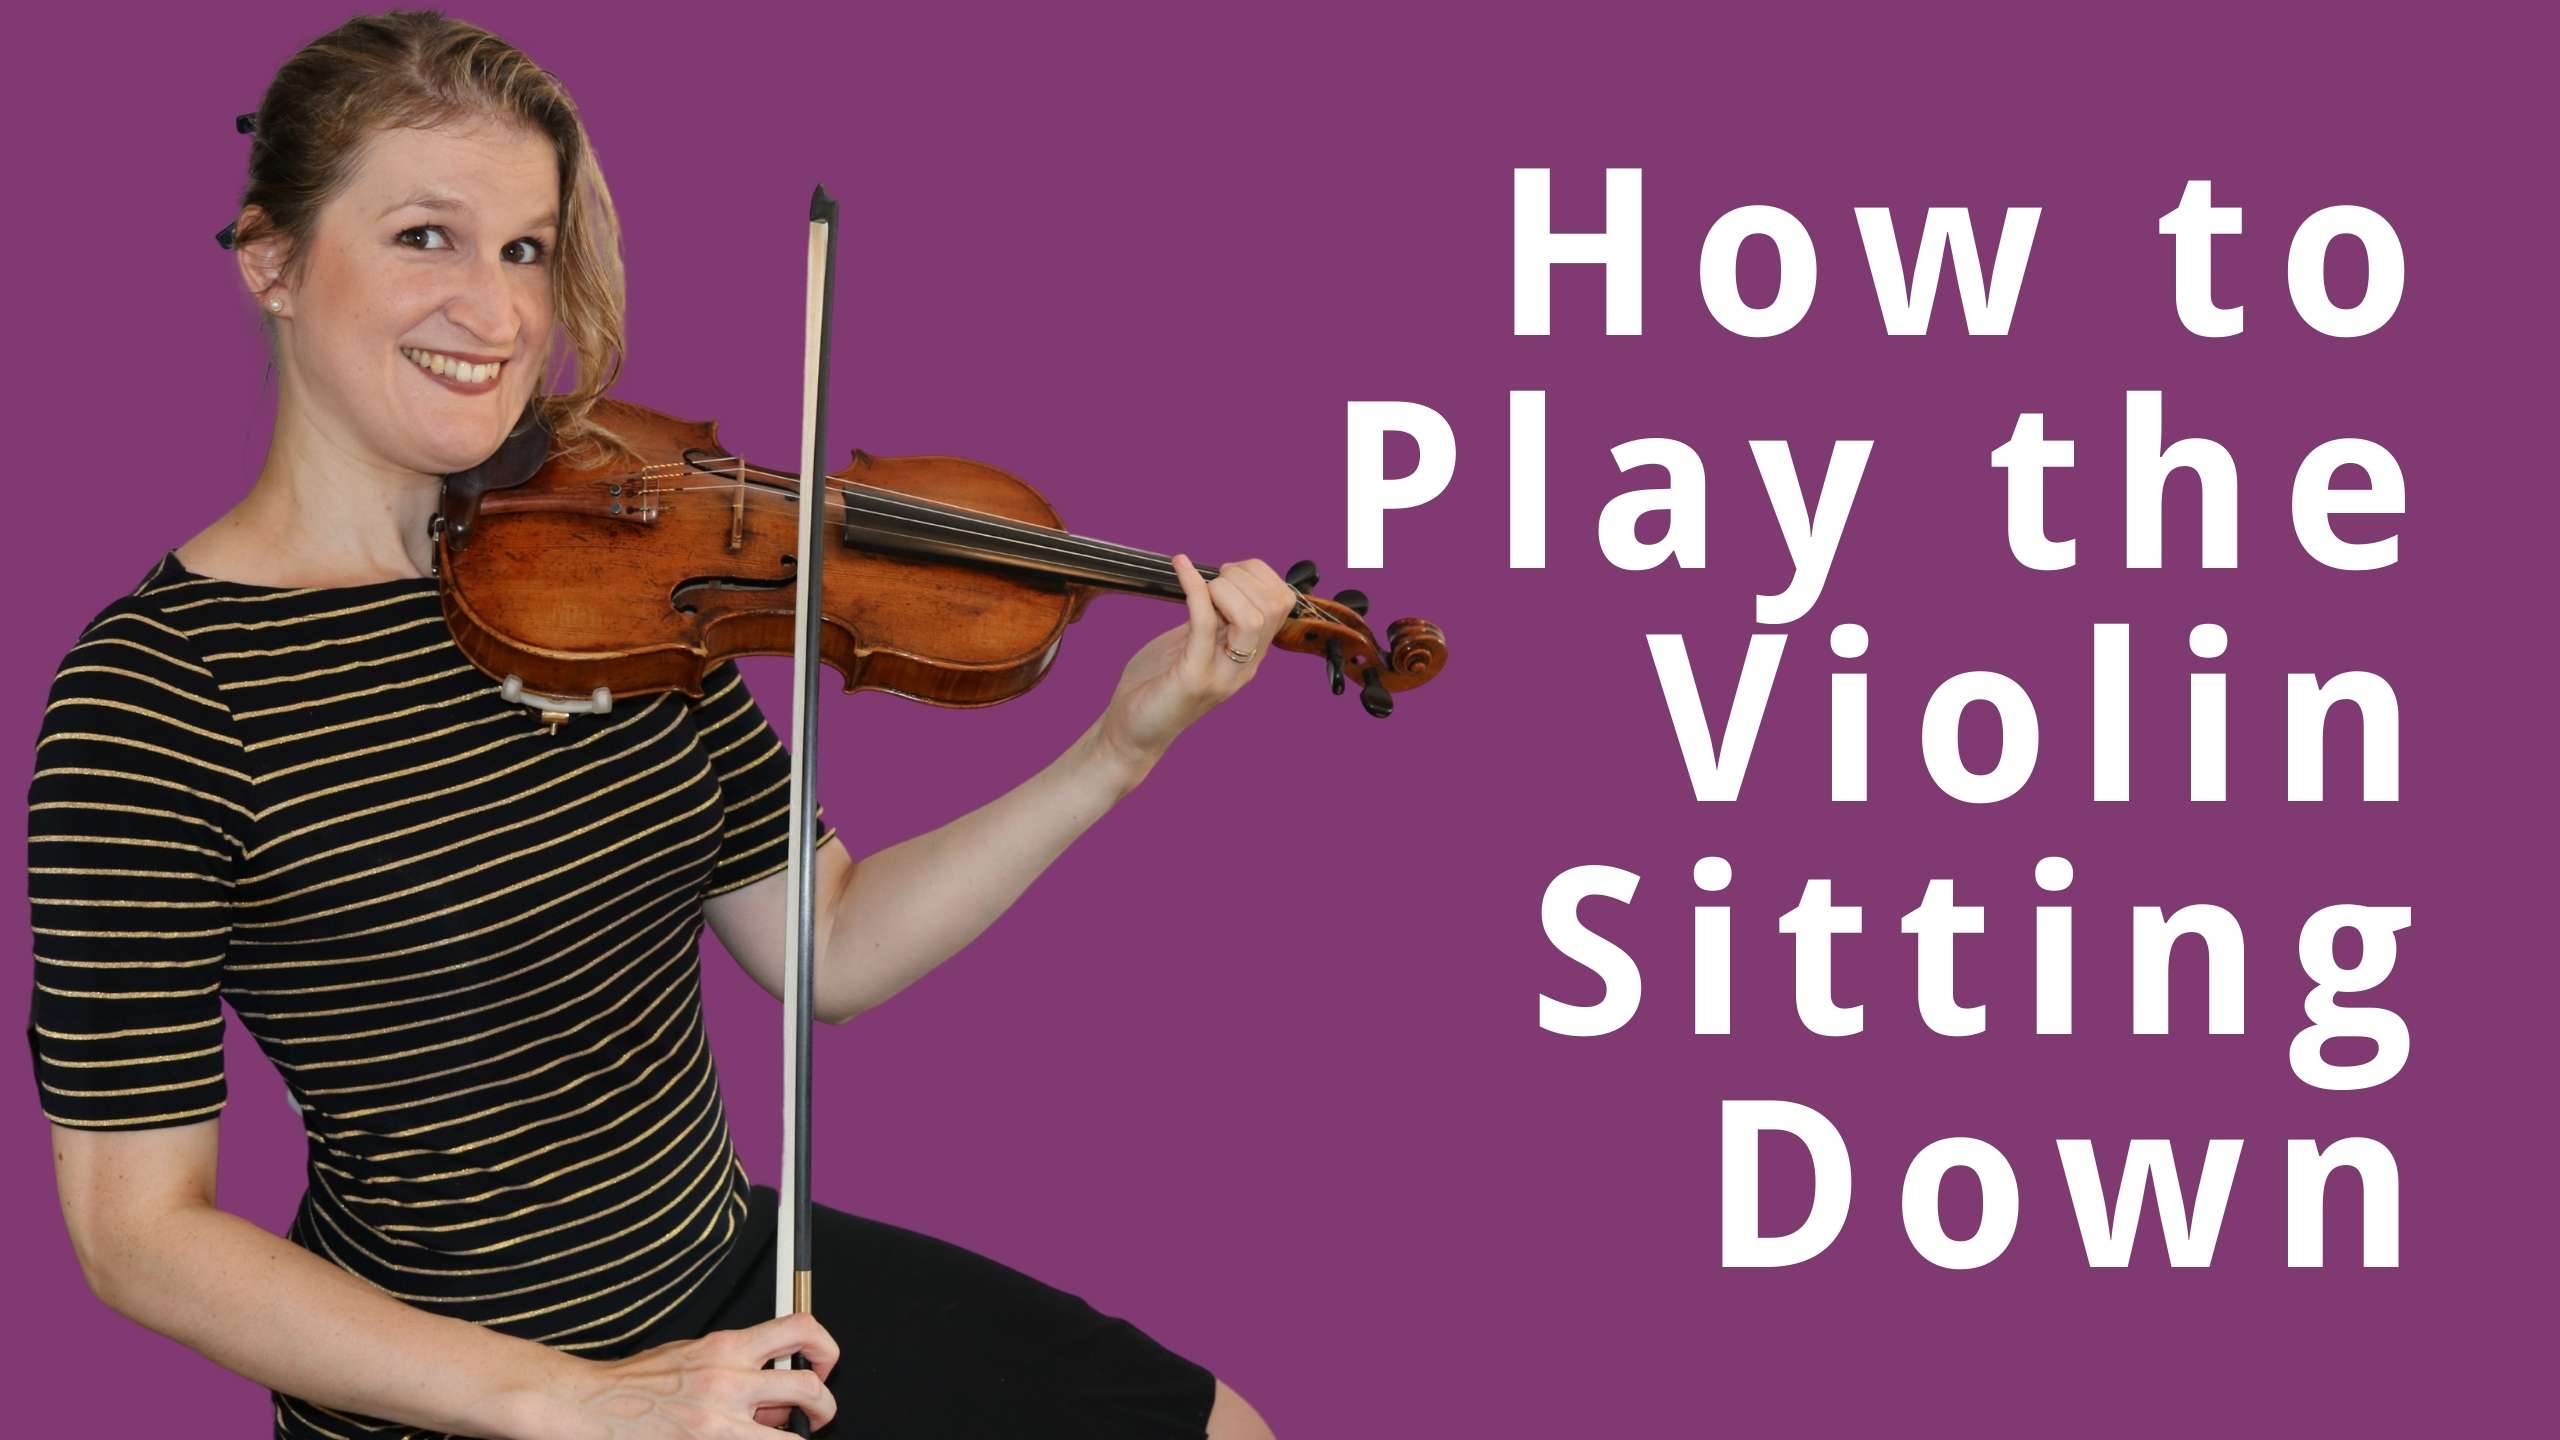 Violin Posture When Sitting Down In An Orchestra Violin Lounge Tv